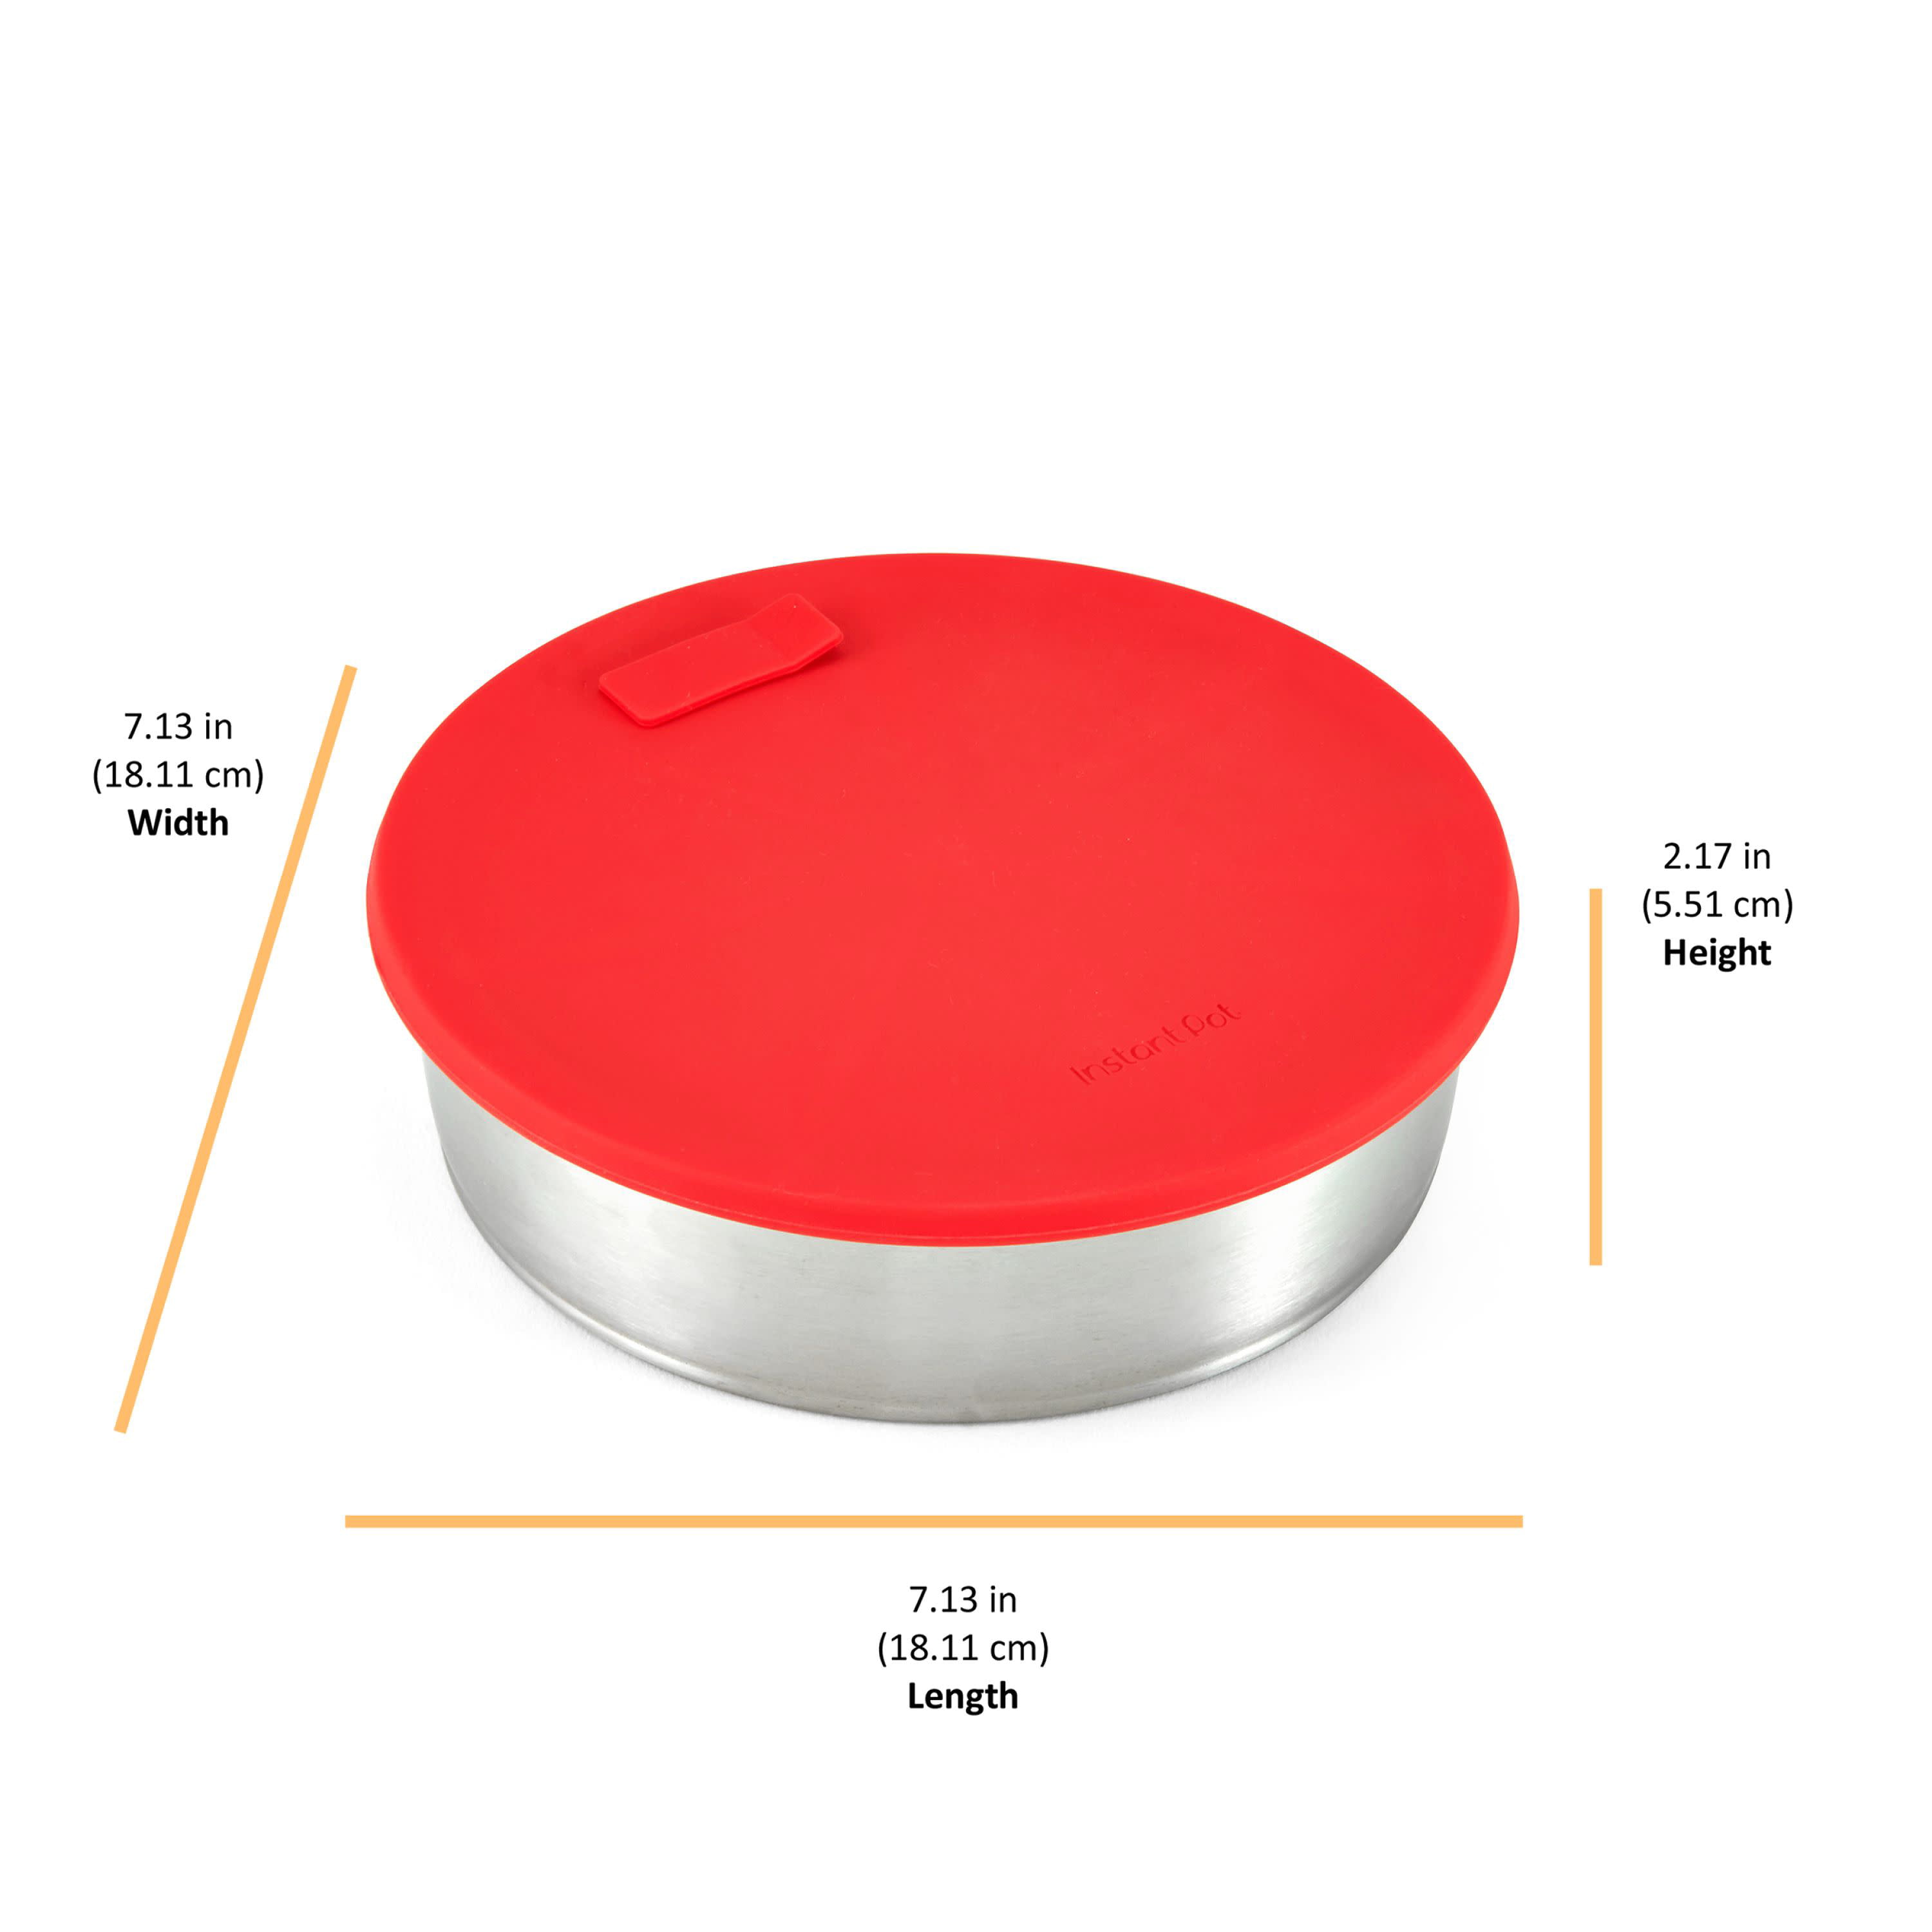 Instant Pot Official Round Cook/Bake Pan with Lid & Removable Divider,  7-inch, 32 ounce capacity, Red with Solid base